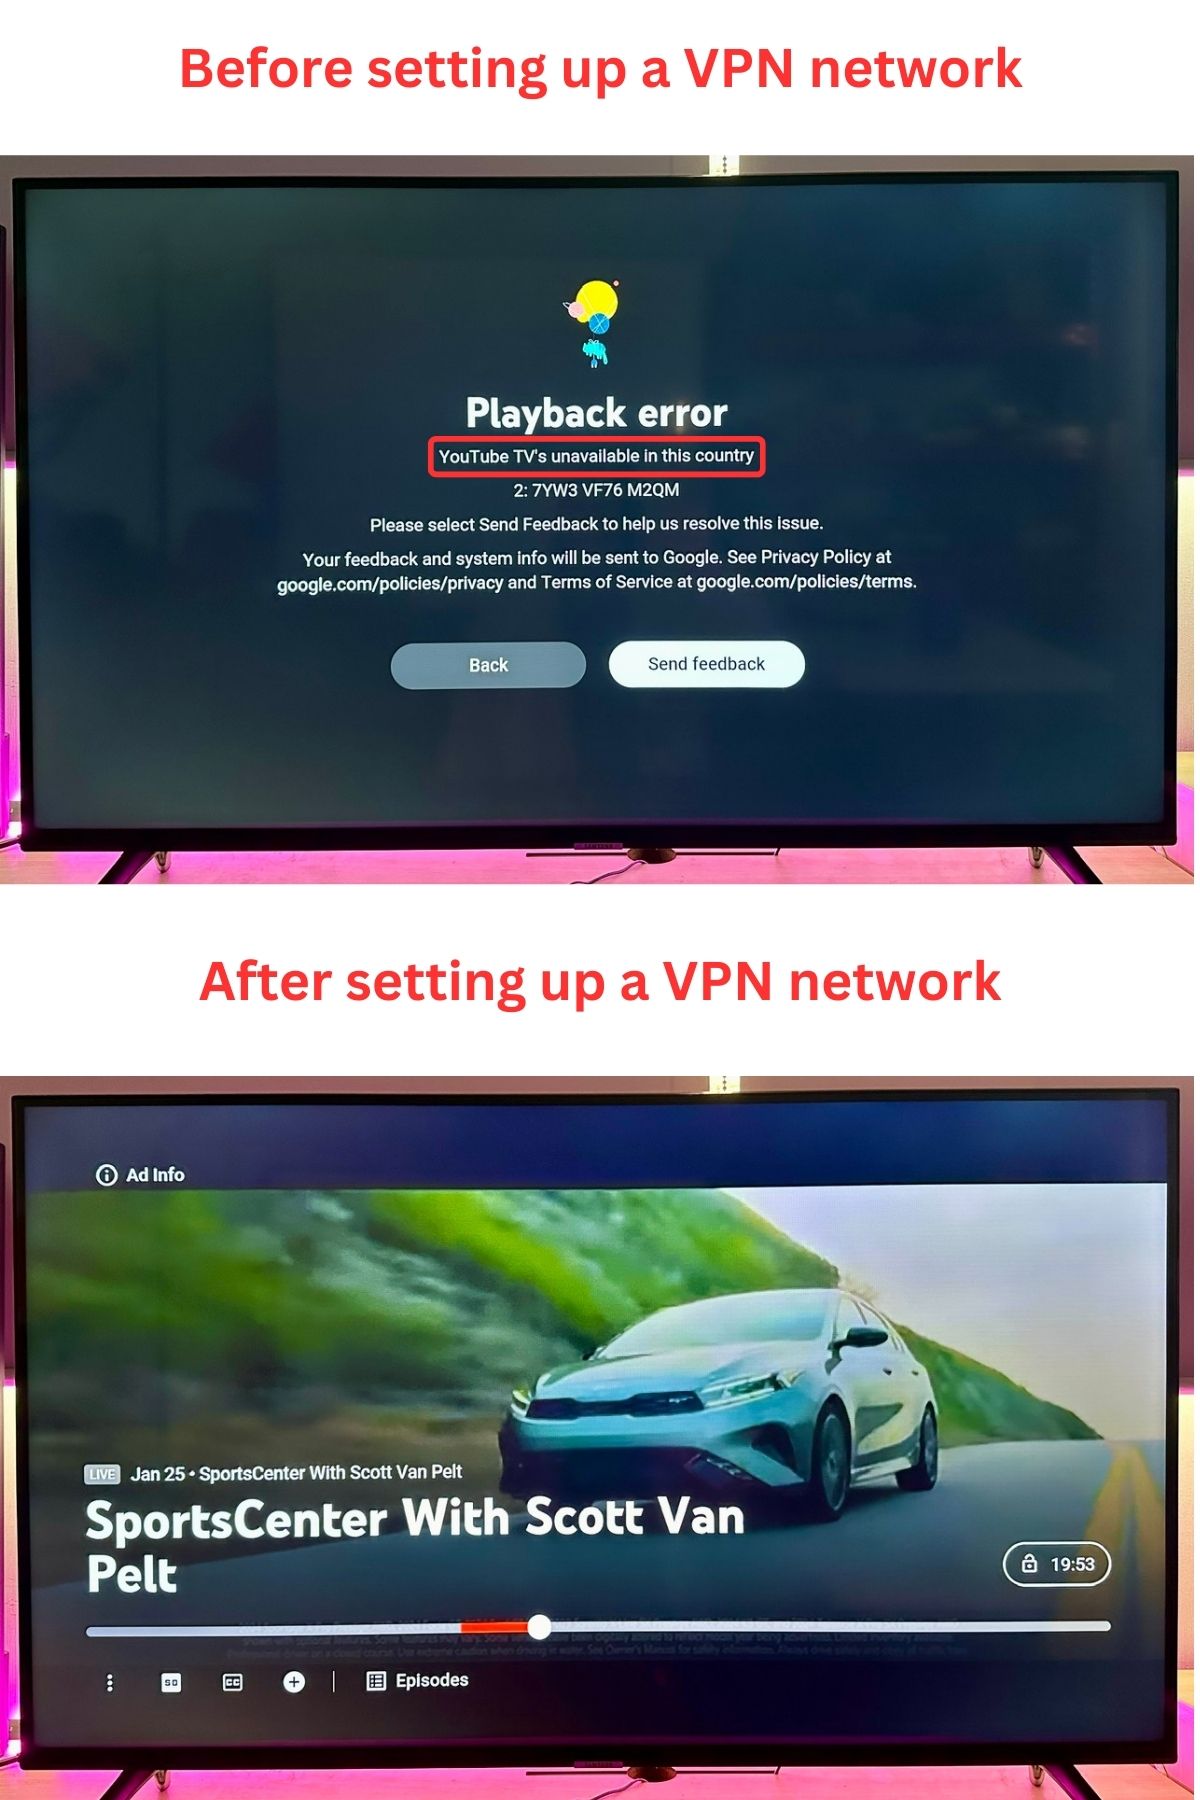 youtube tv content on a samsung tv before and after setting up a VPN network